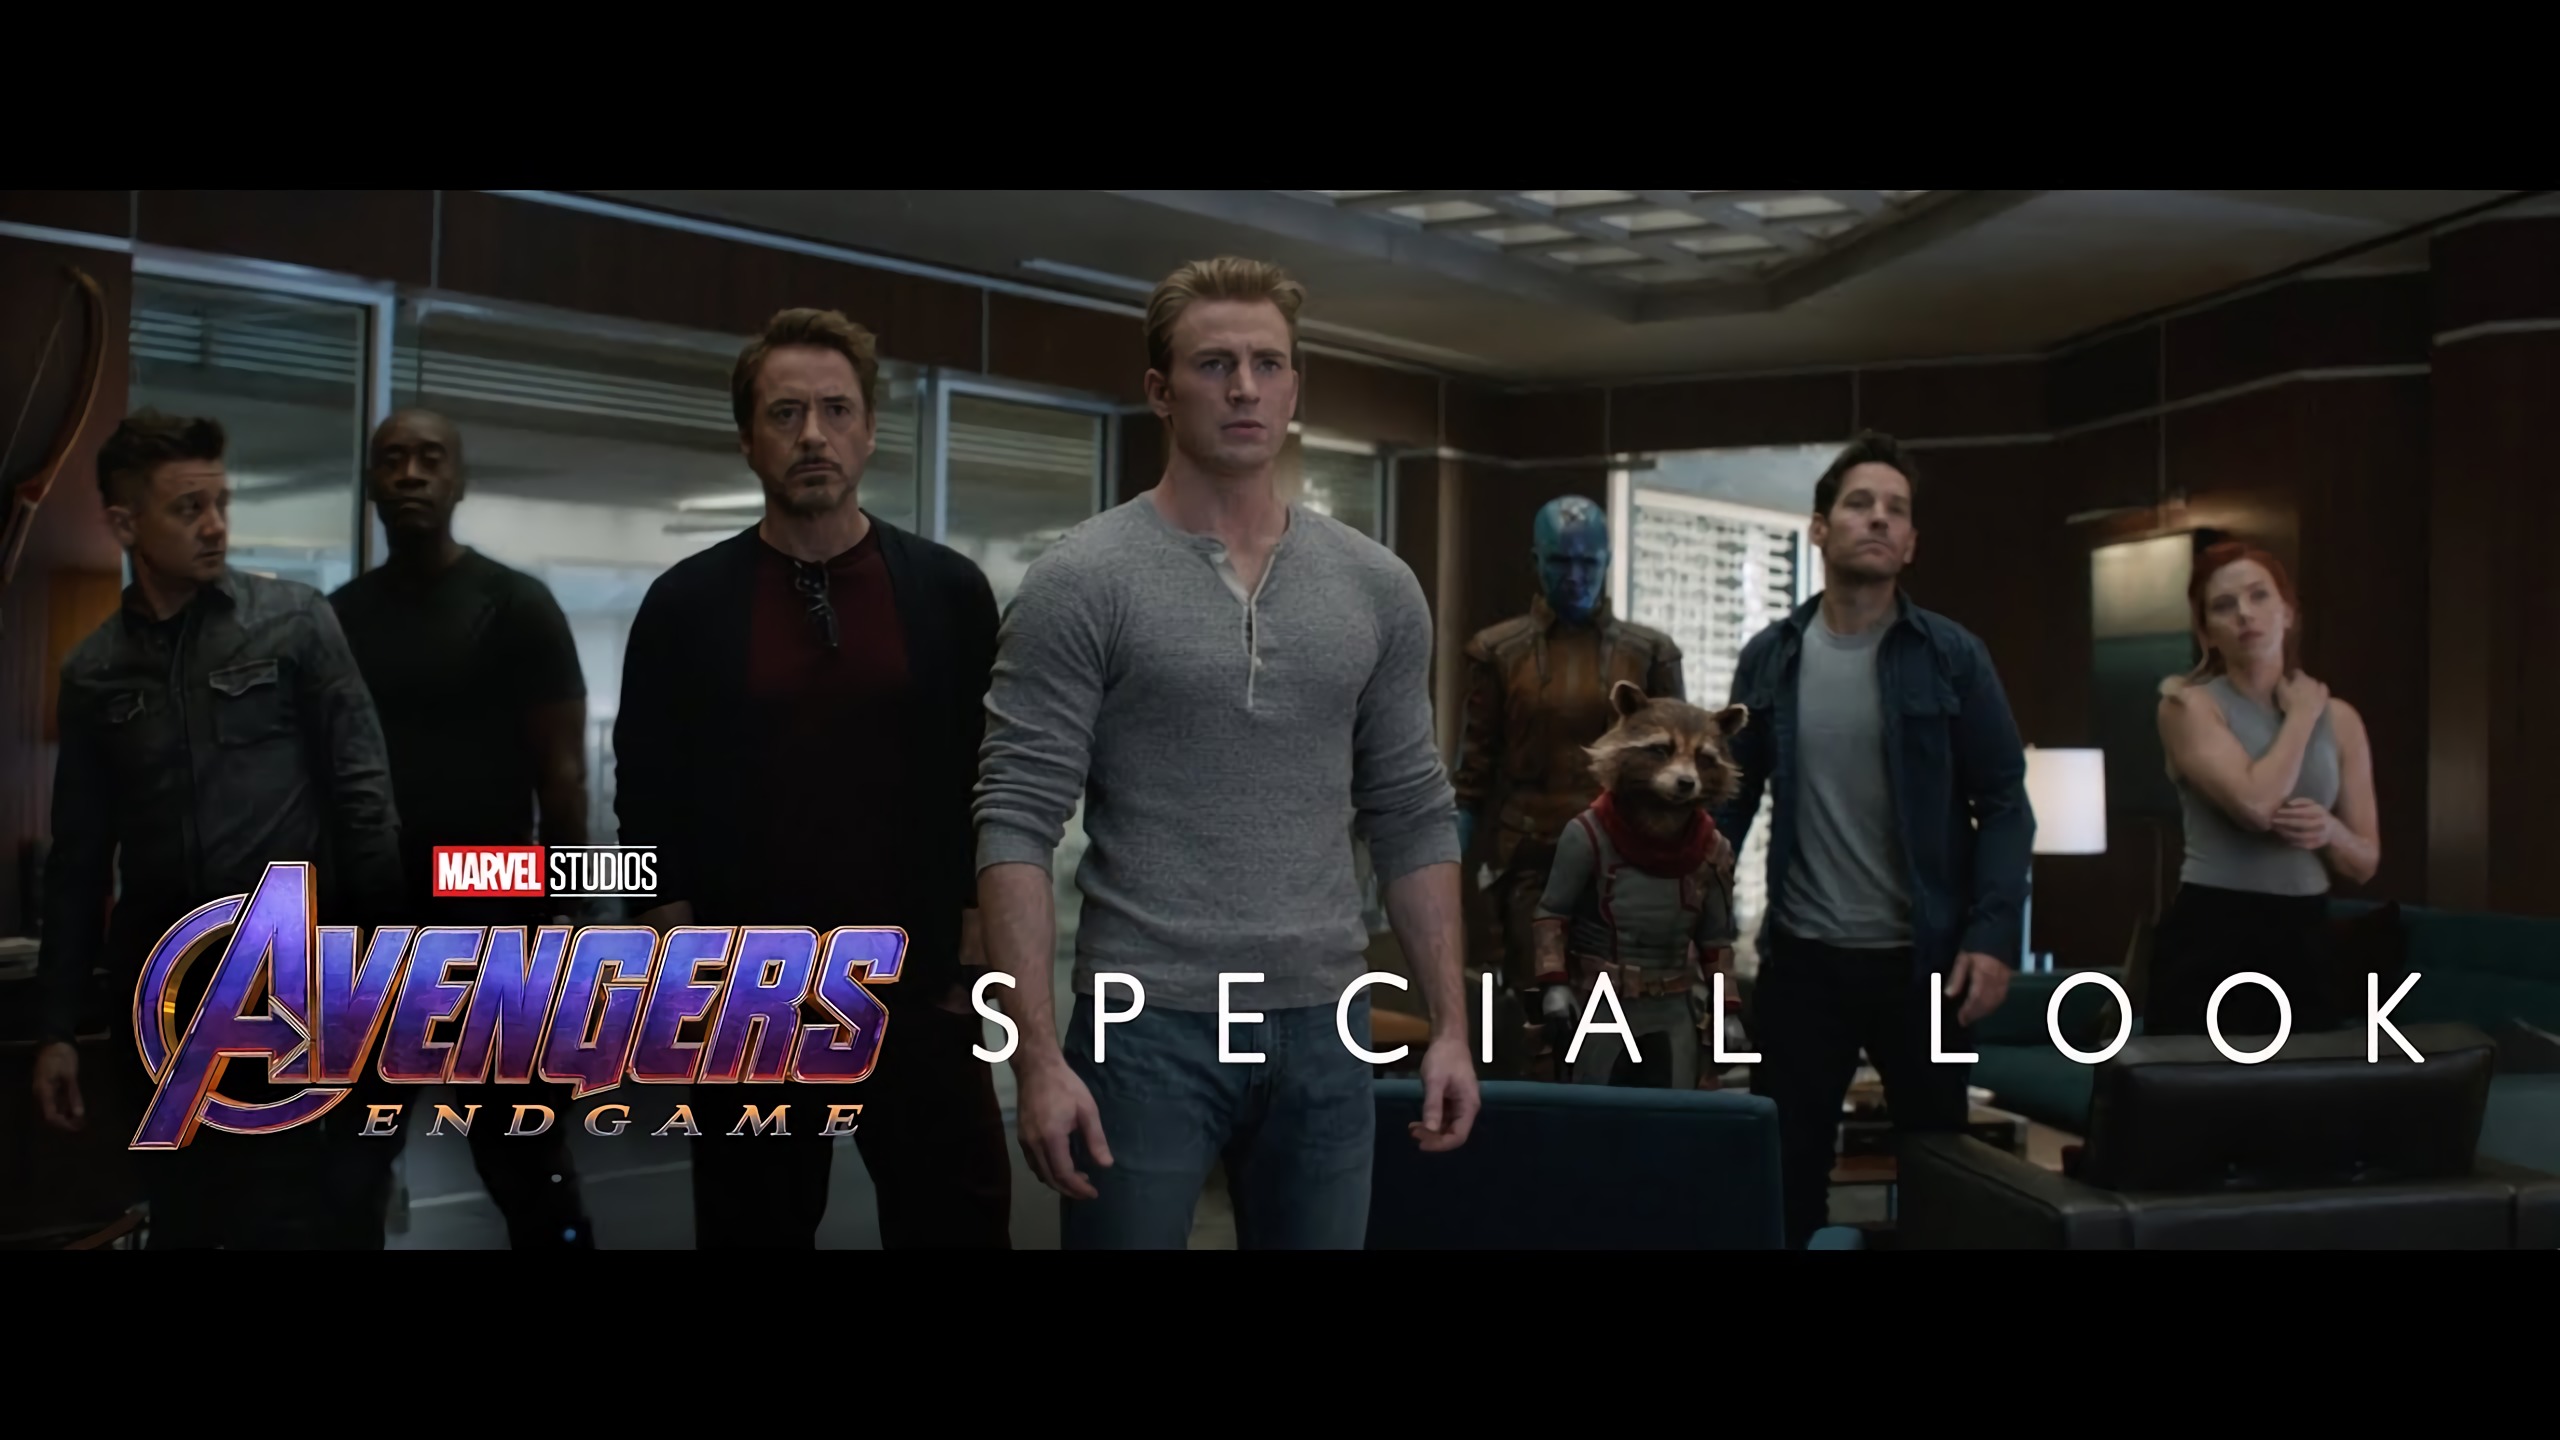 'Avengers: Endgame' special look reveals the Avengers regrouping for a Thanos rematch